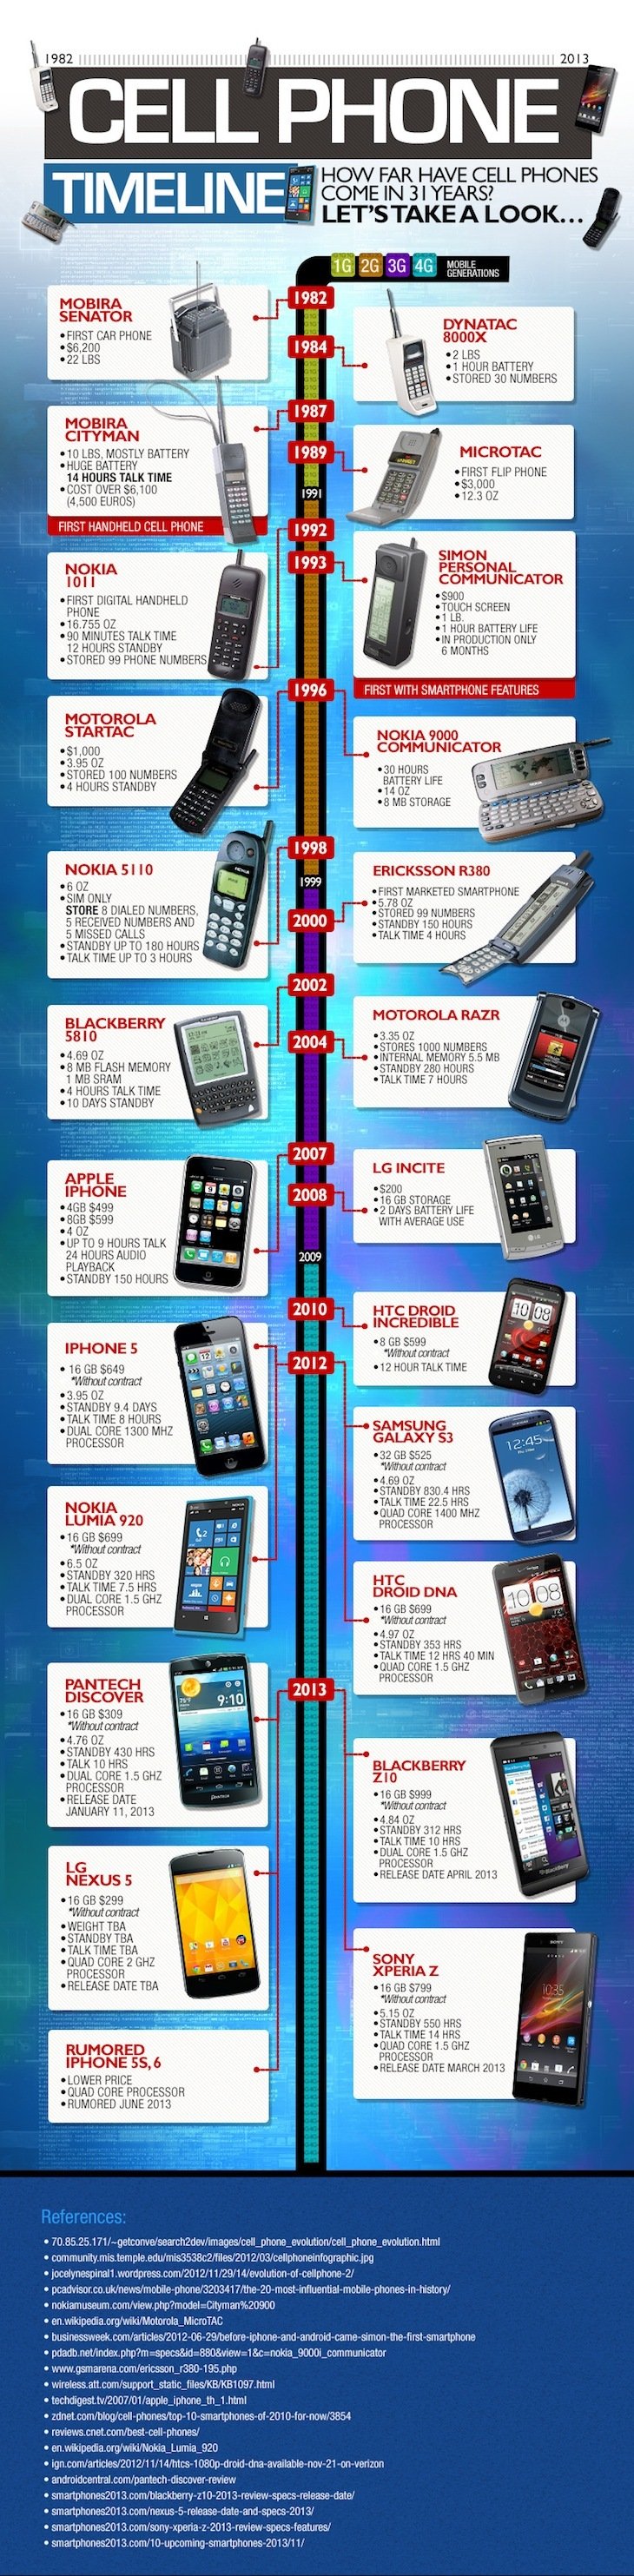 Cell-Phone-Timeline-1